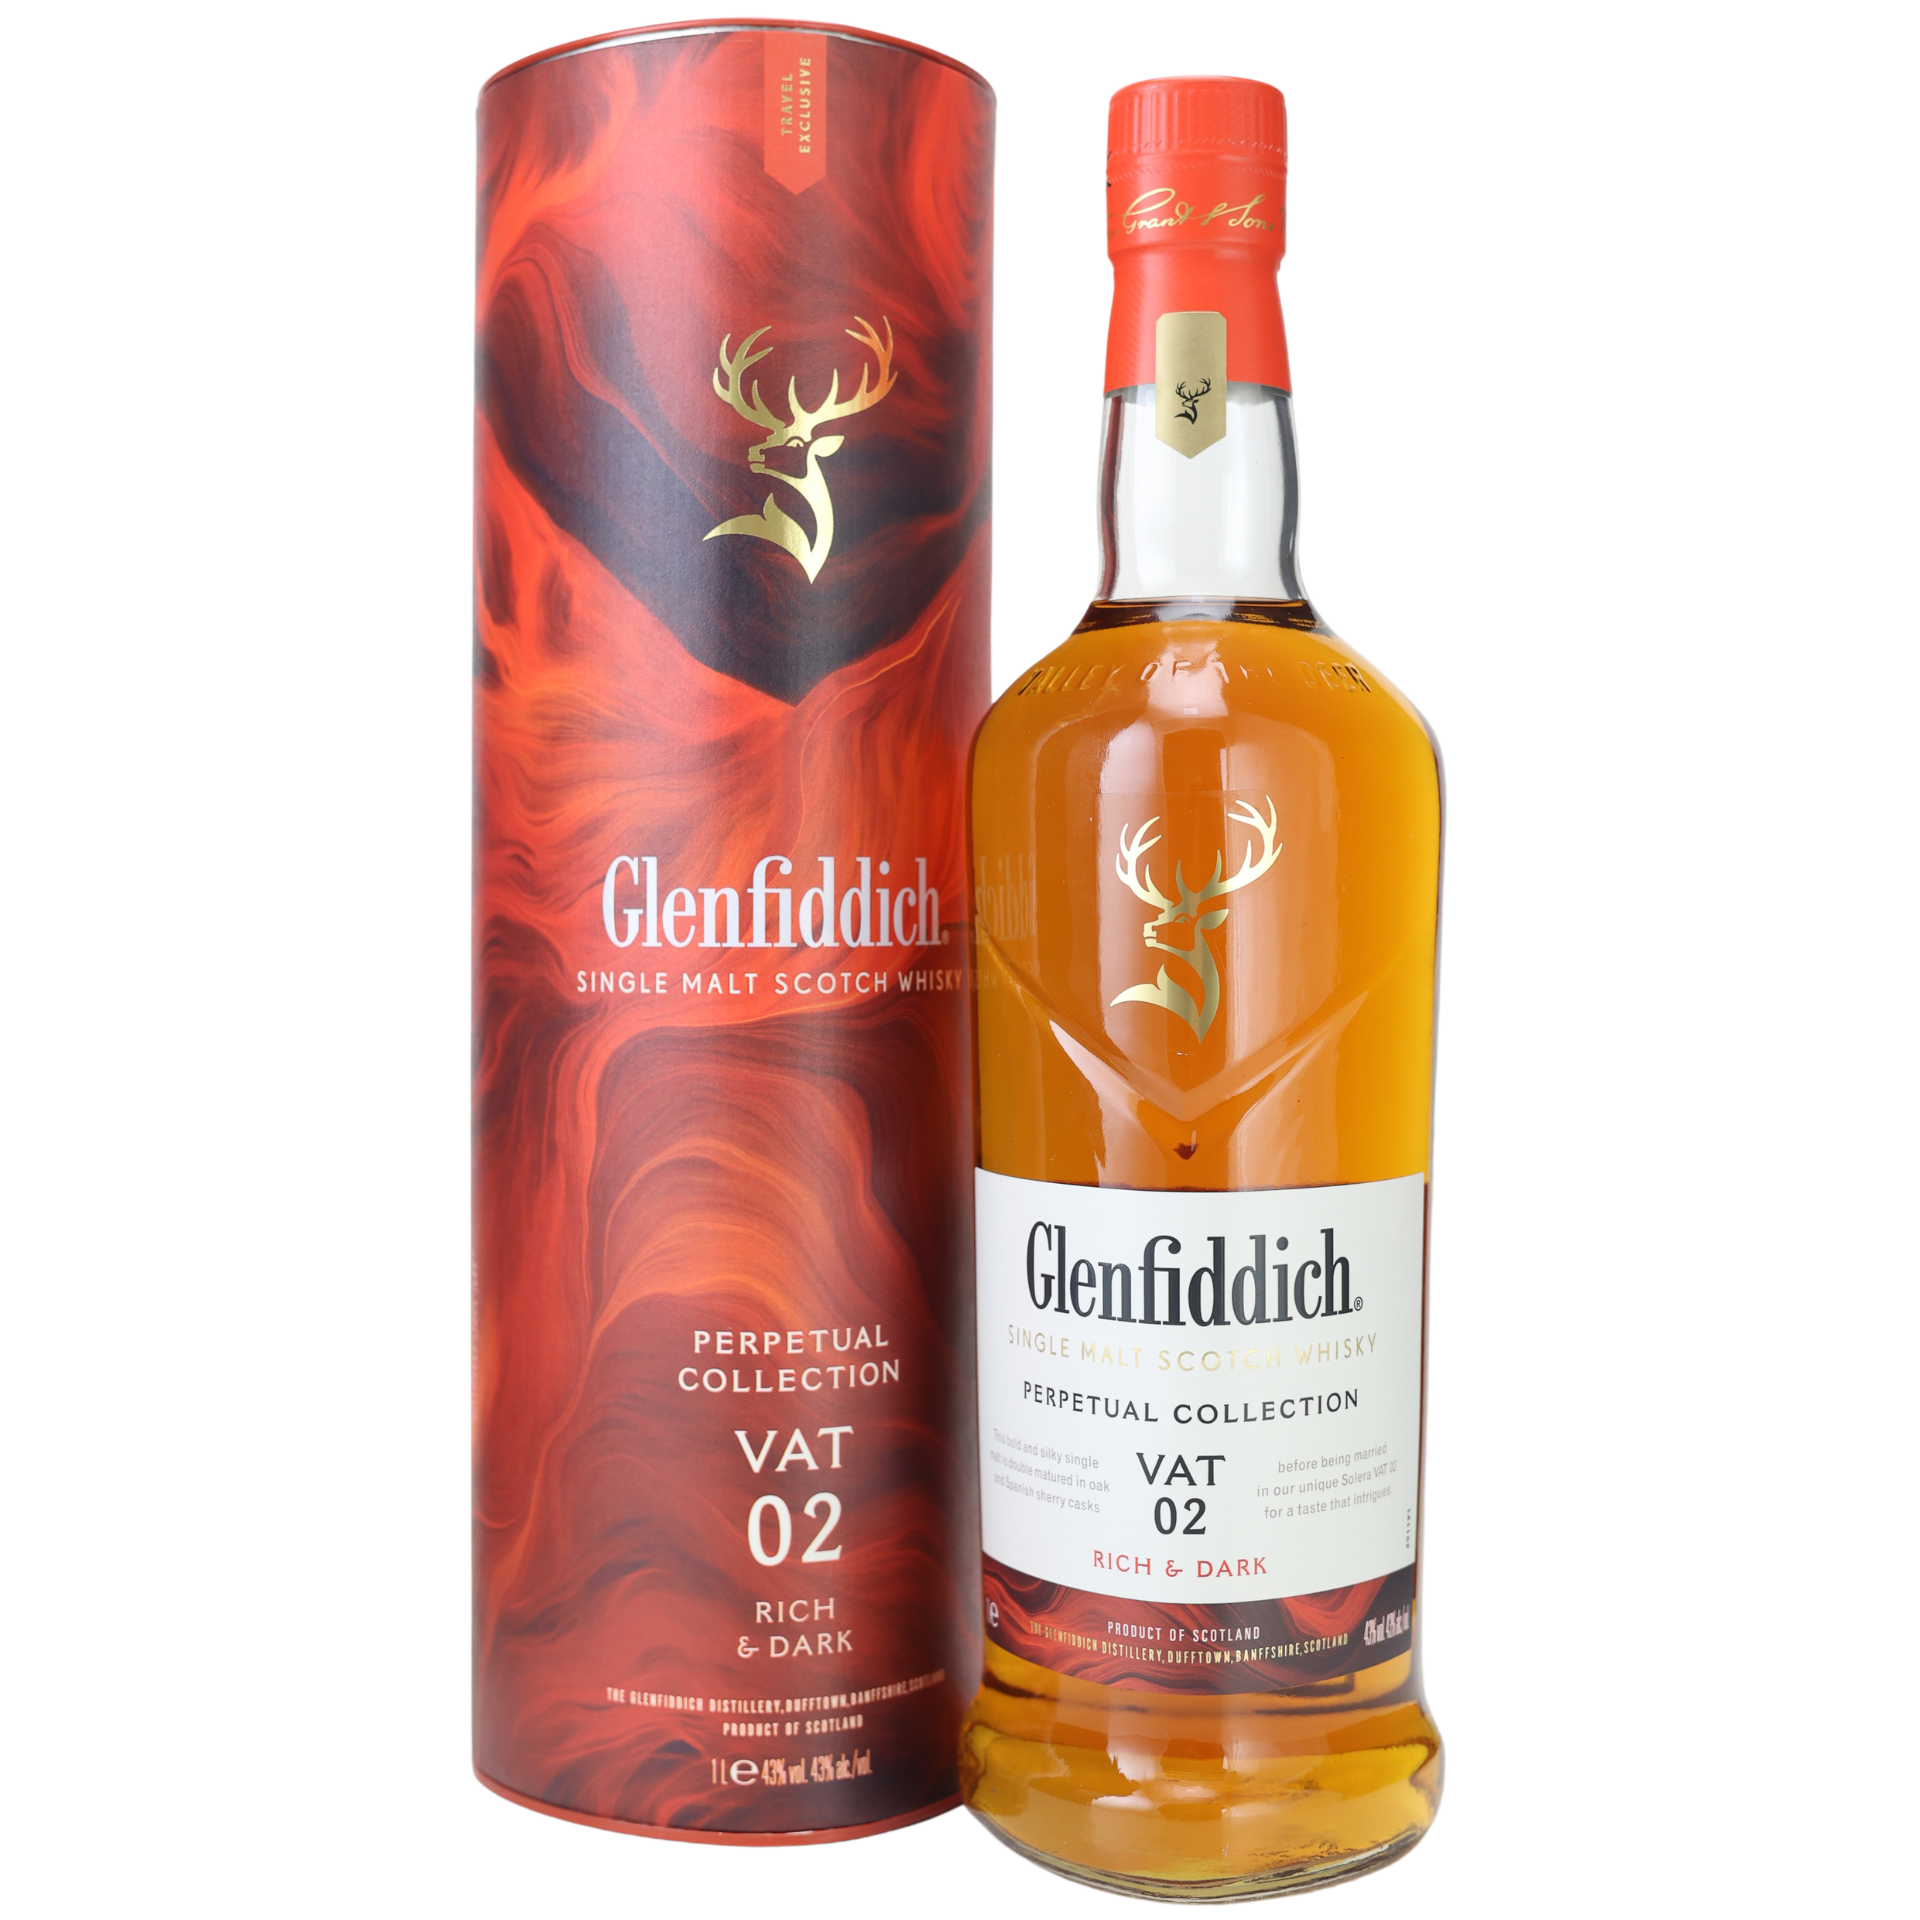 Glenfiddich VAT 02 Perpetual Collection Whisky 43% 1,0l